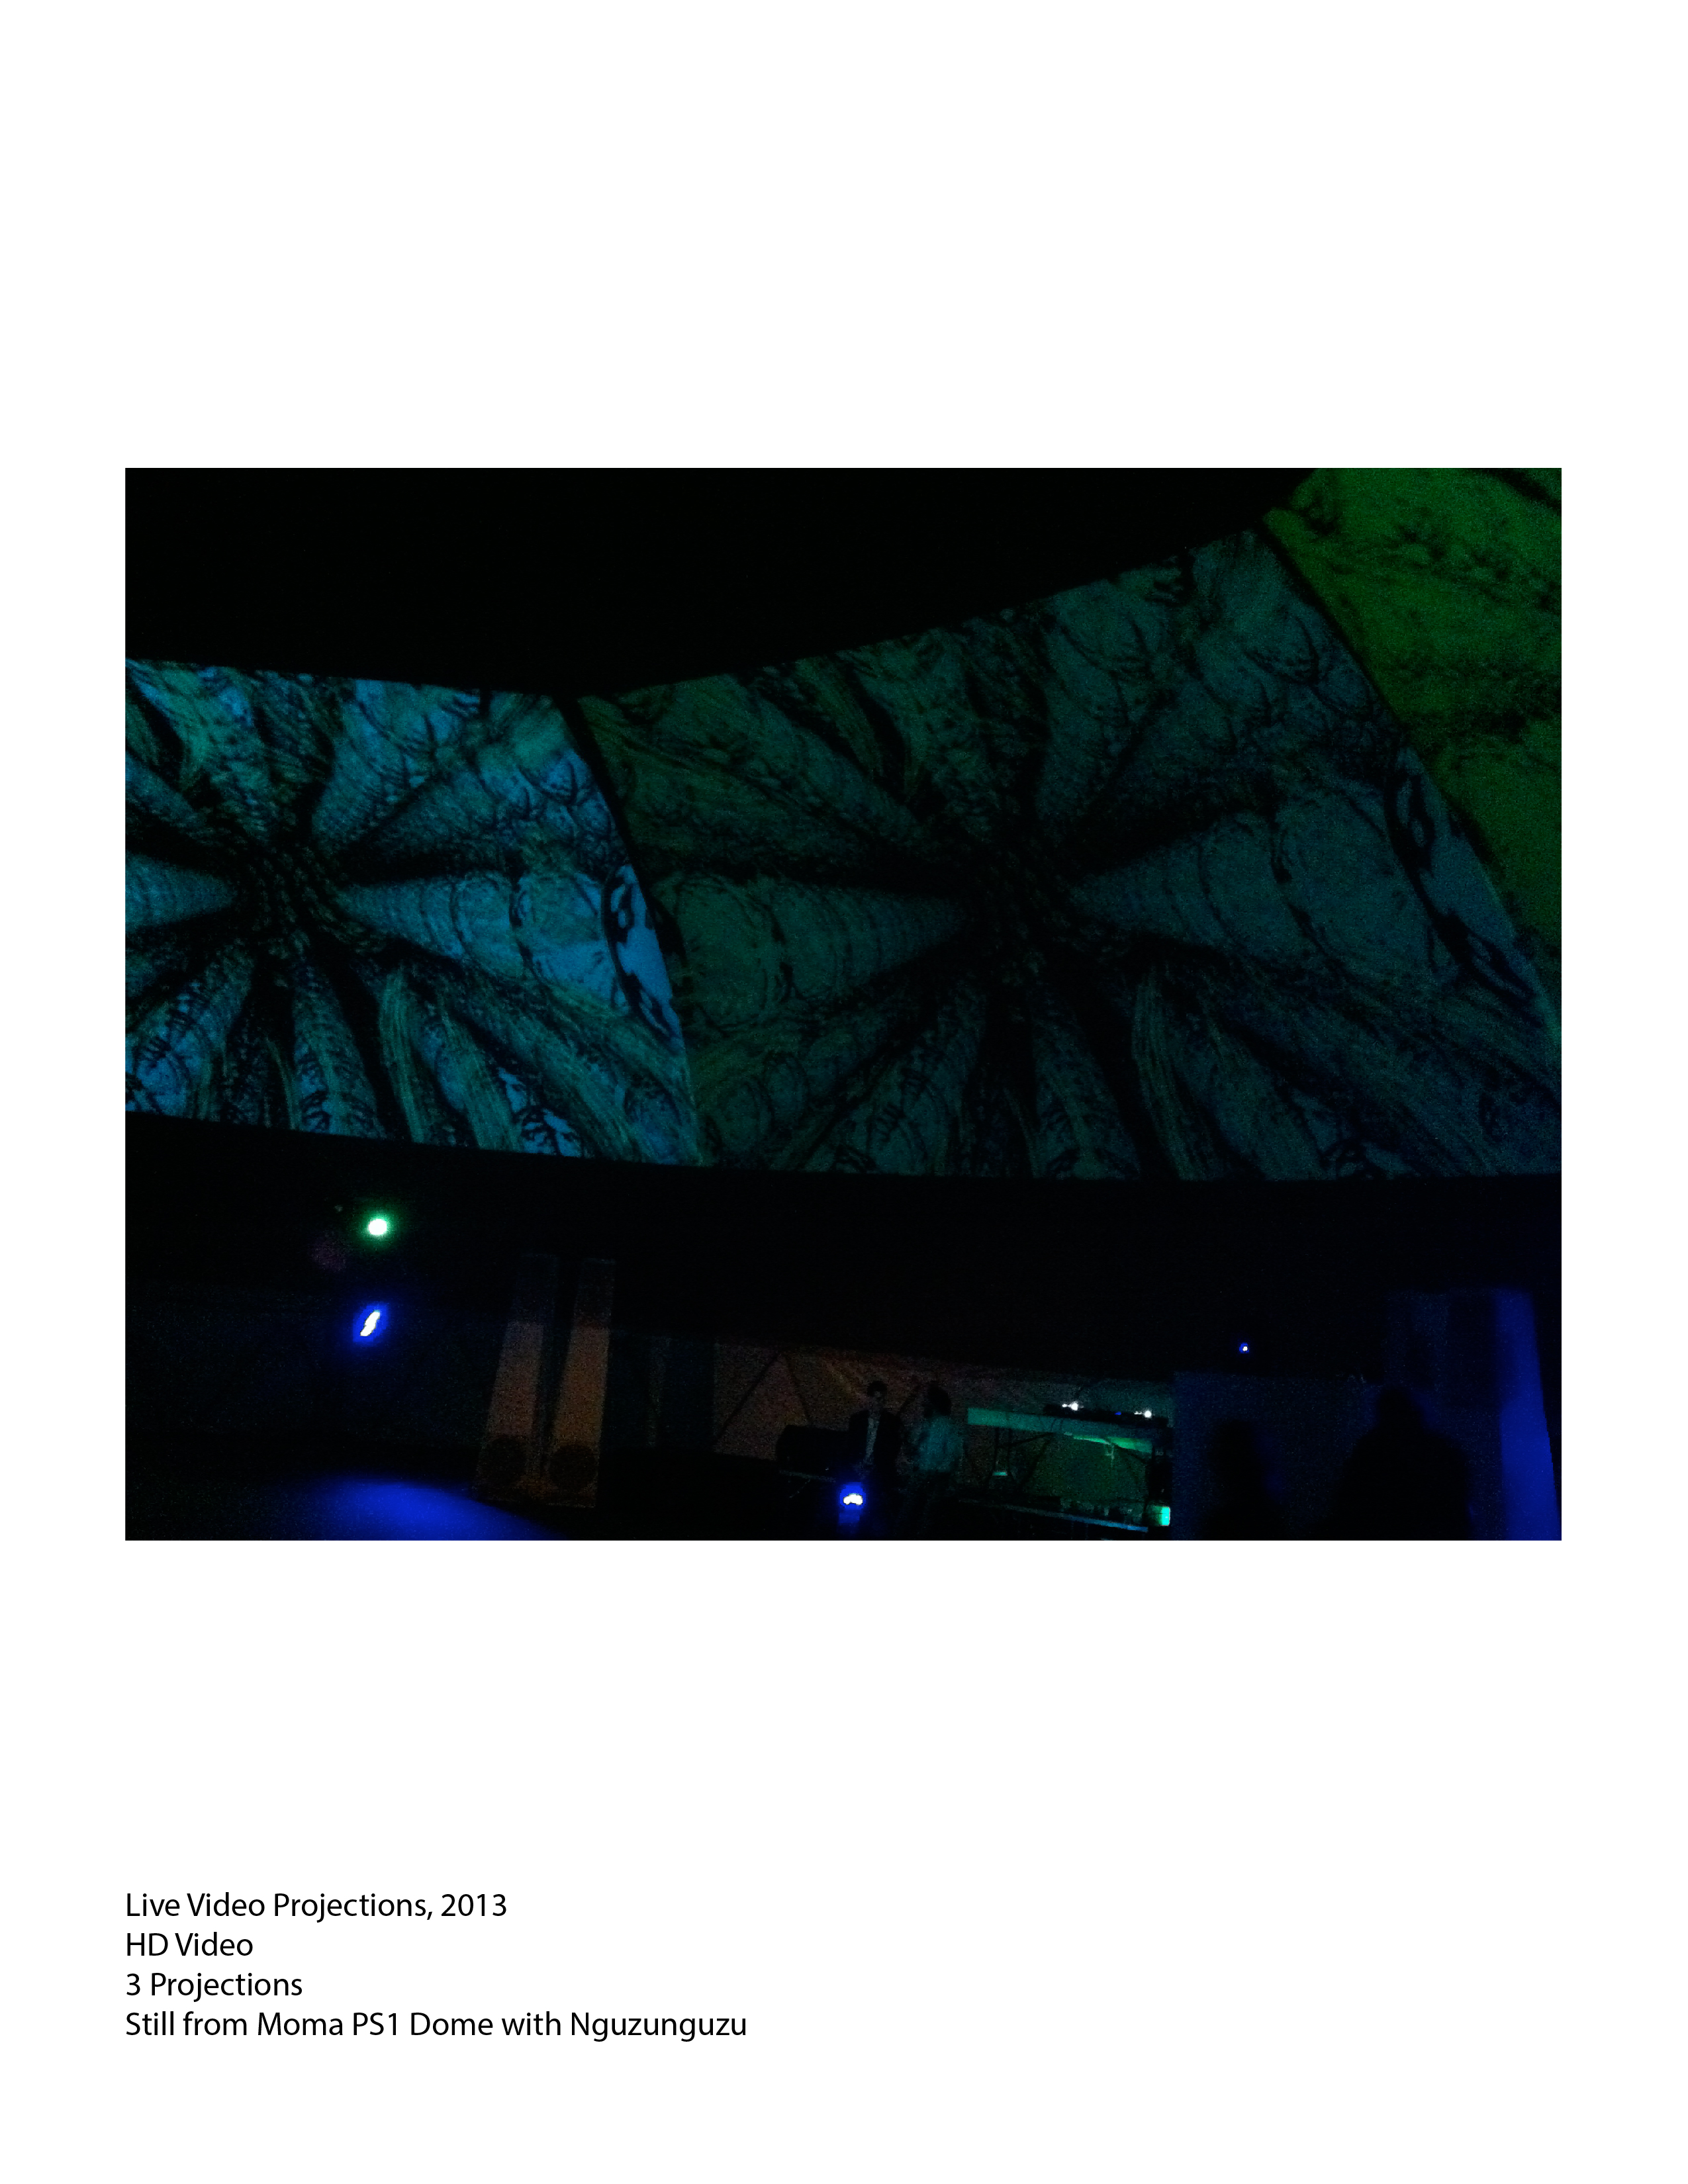 7. Live Video Projections, 2013